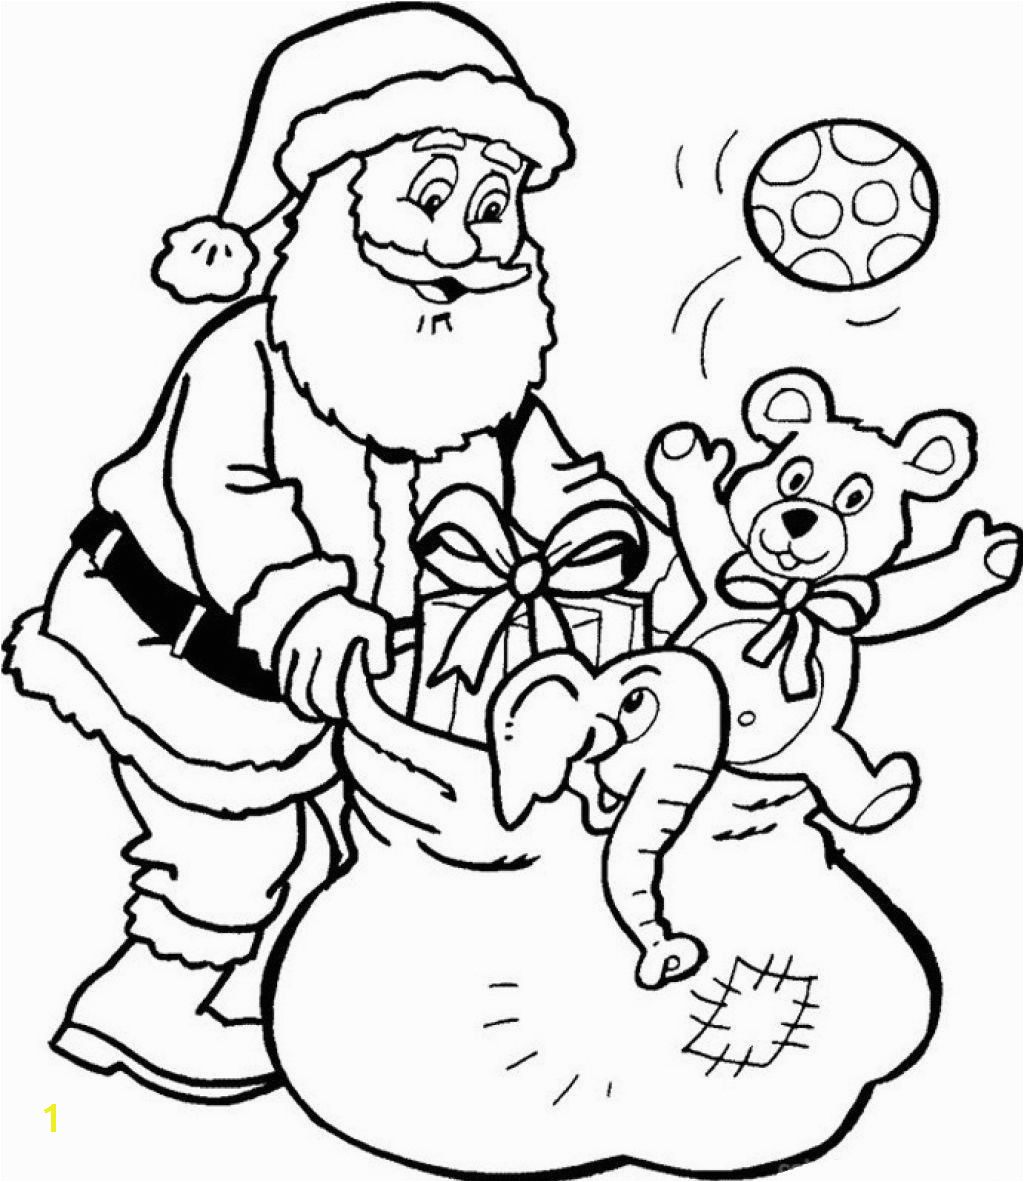 Santa Claus with Reindeer Coloring Pages Santa Claus and Presents Printable Coloring Pages Christmas